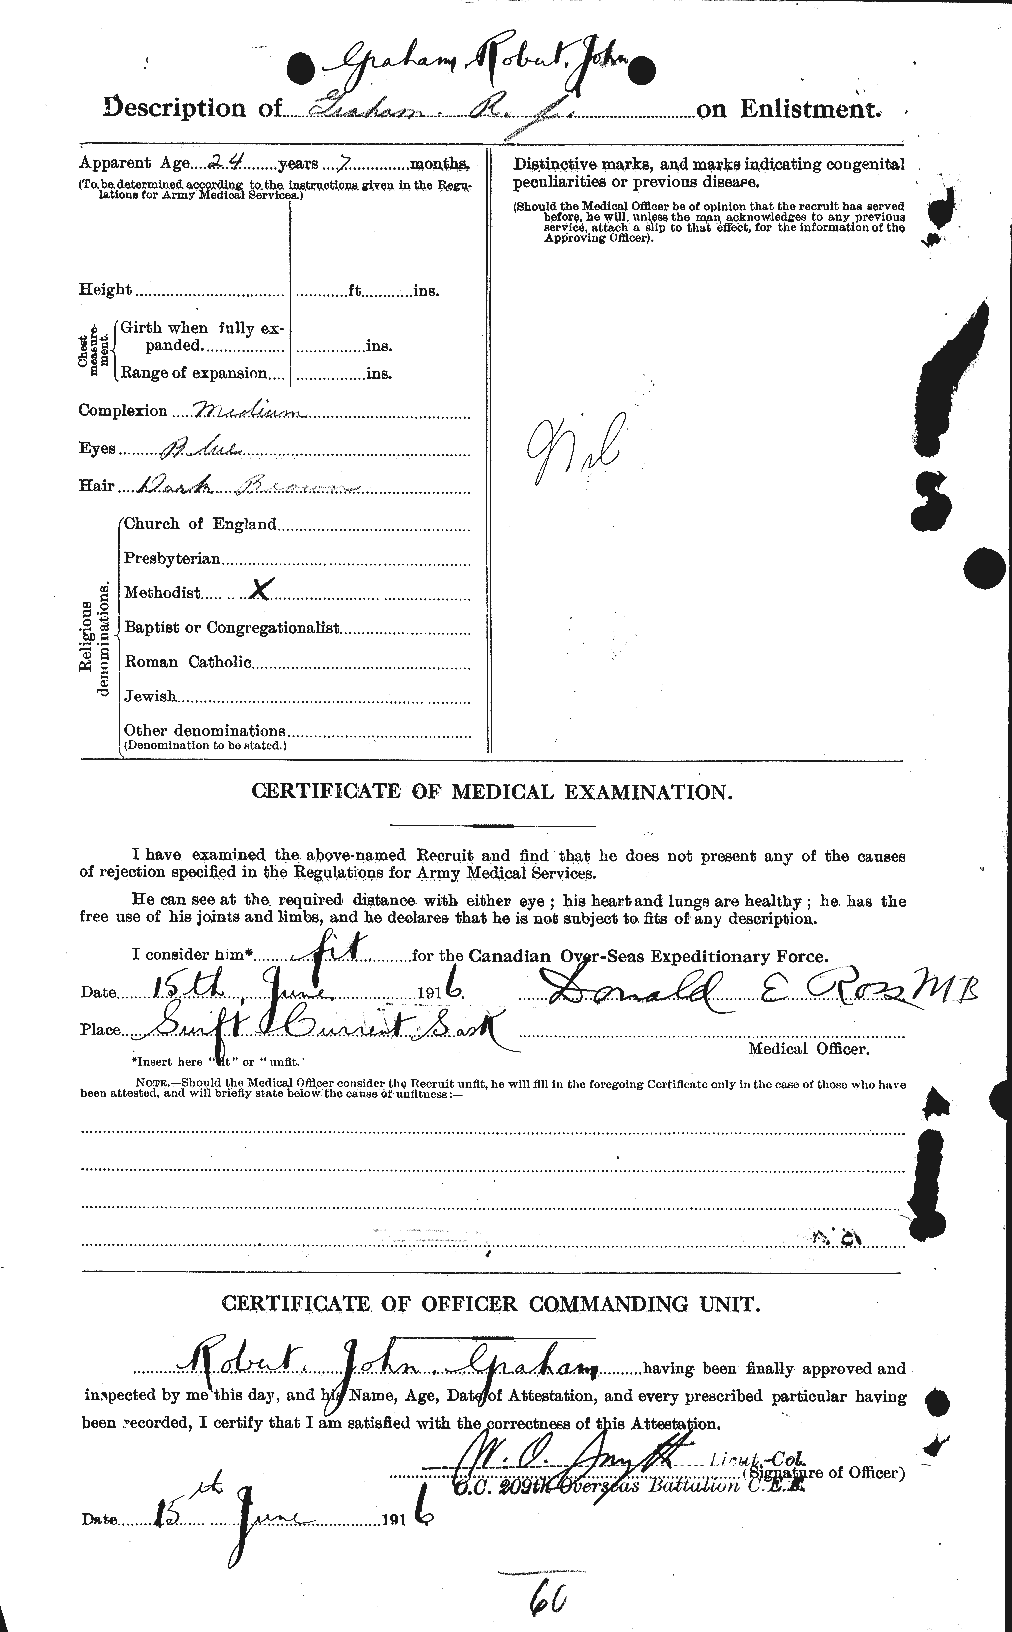 Personnel Records of the First World War - CEF 359413b